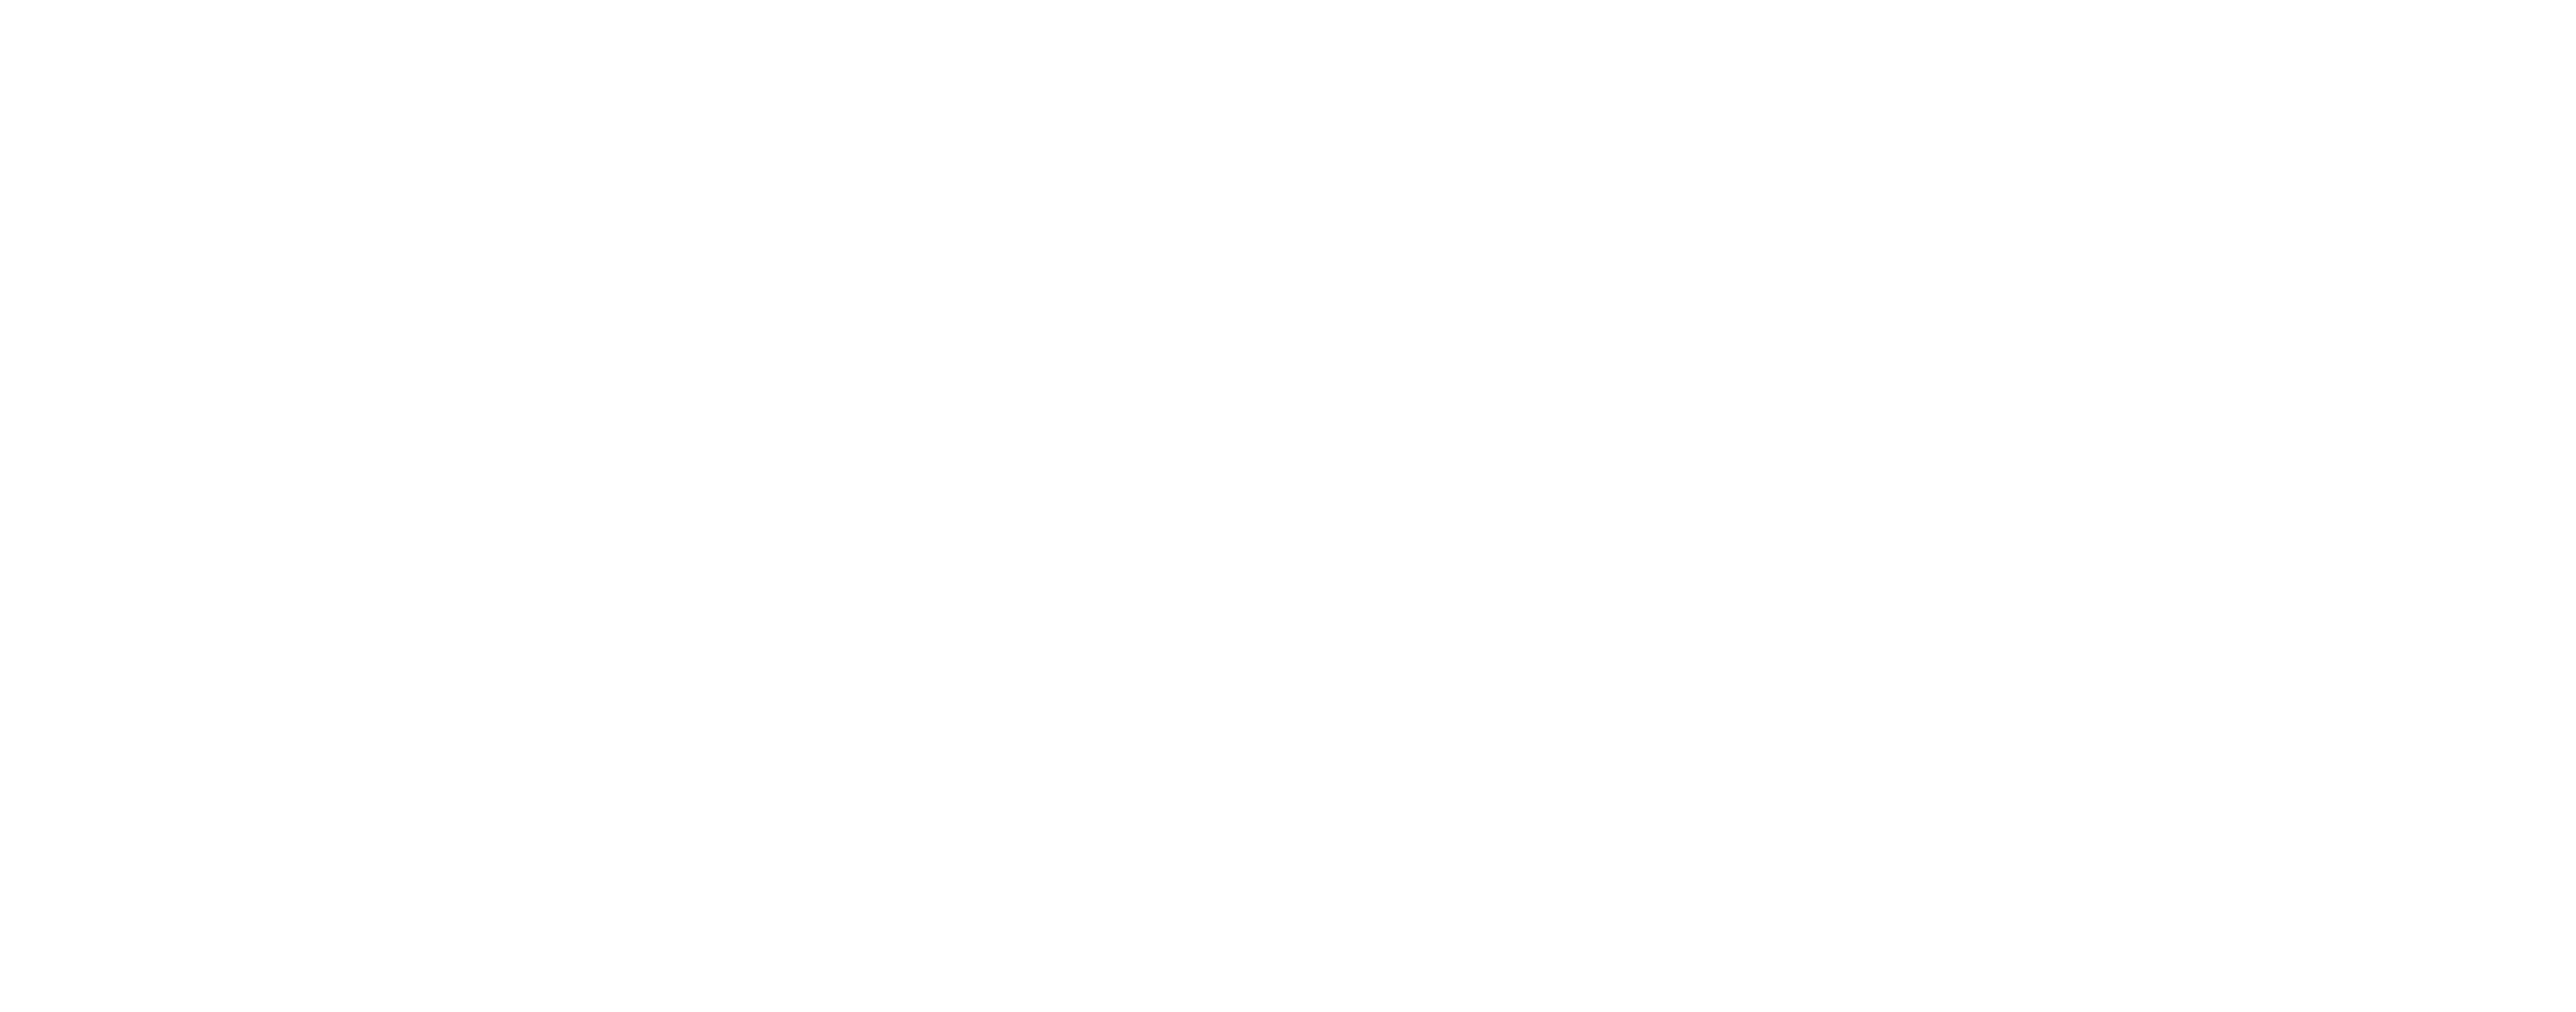 forbes-logo-black-and-white-5